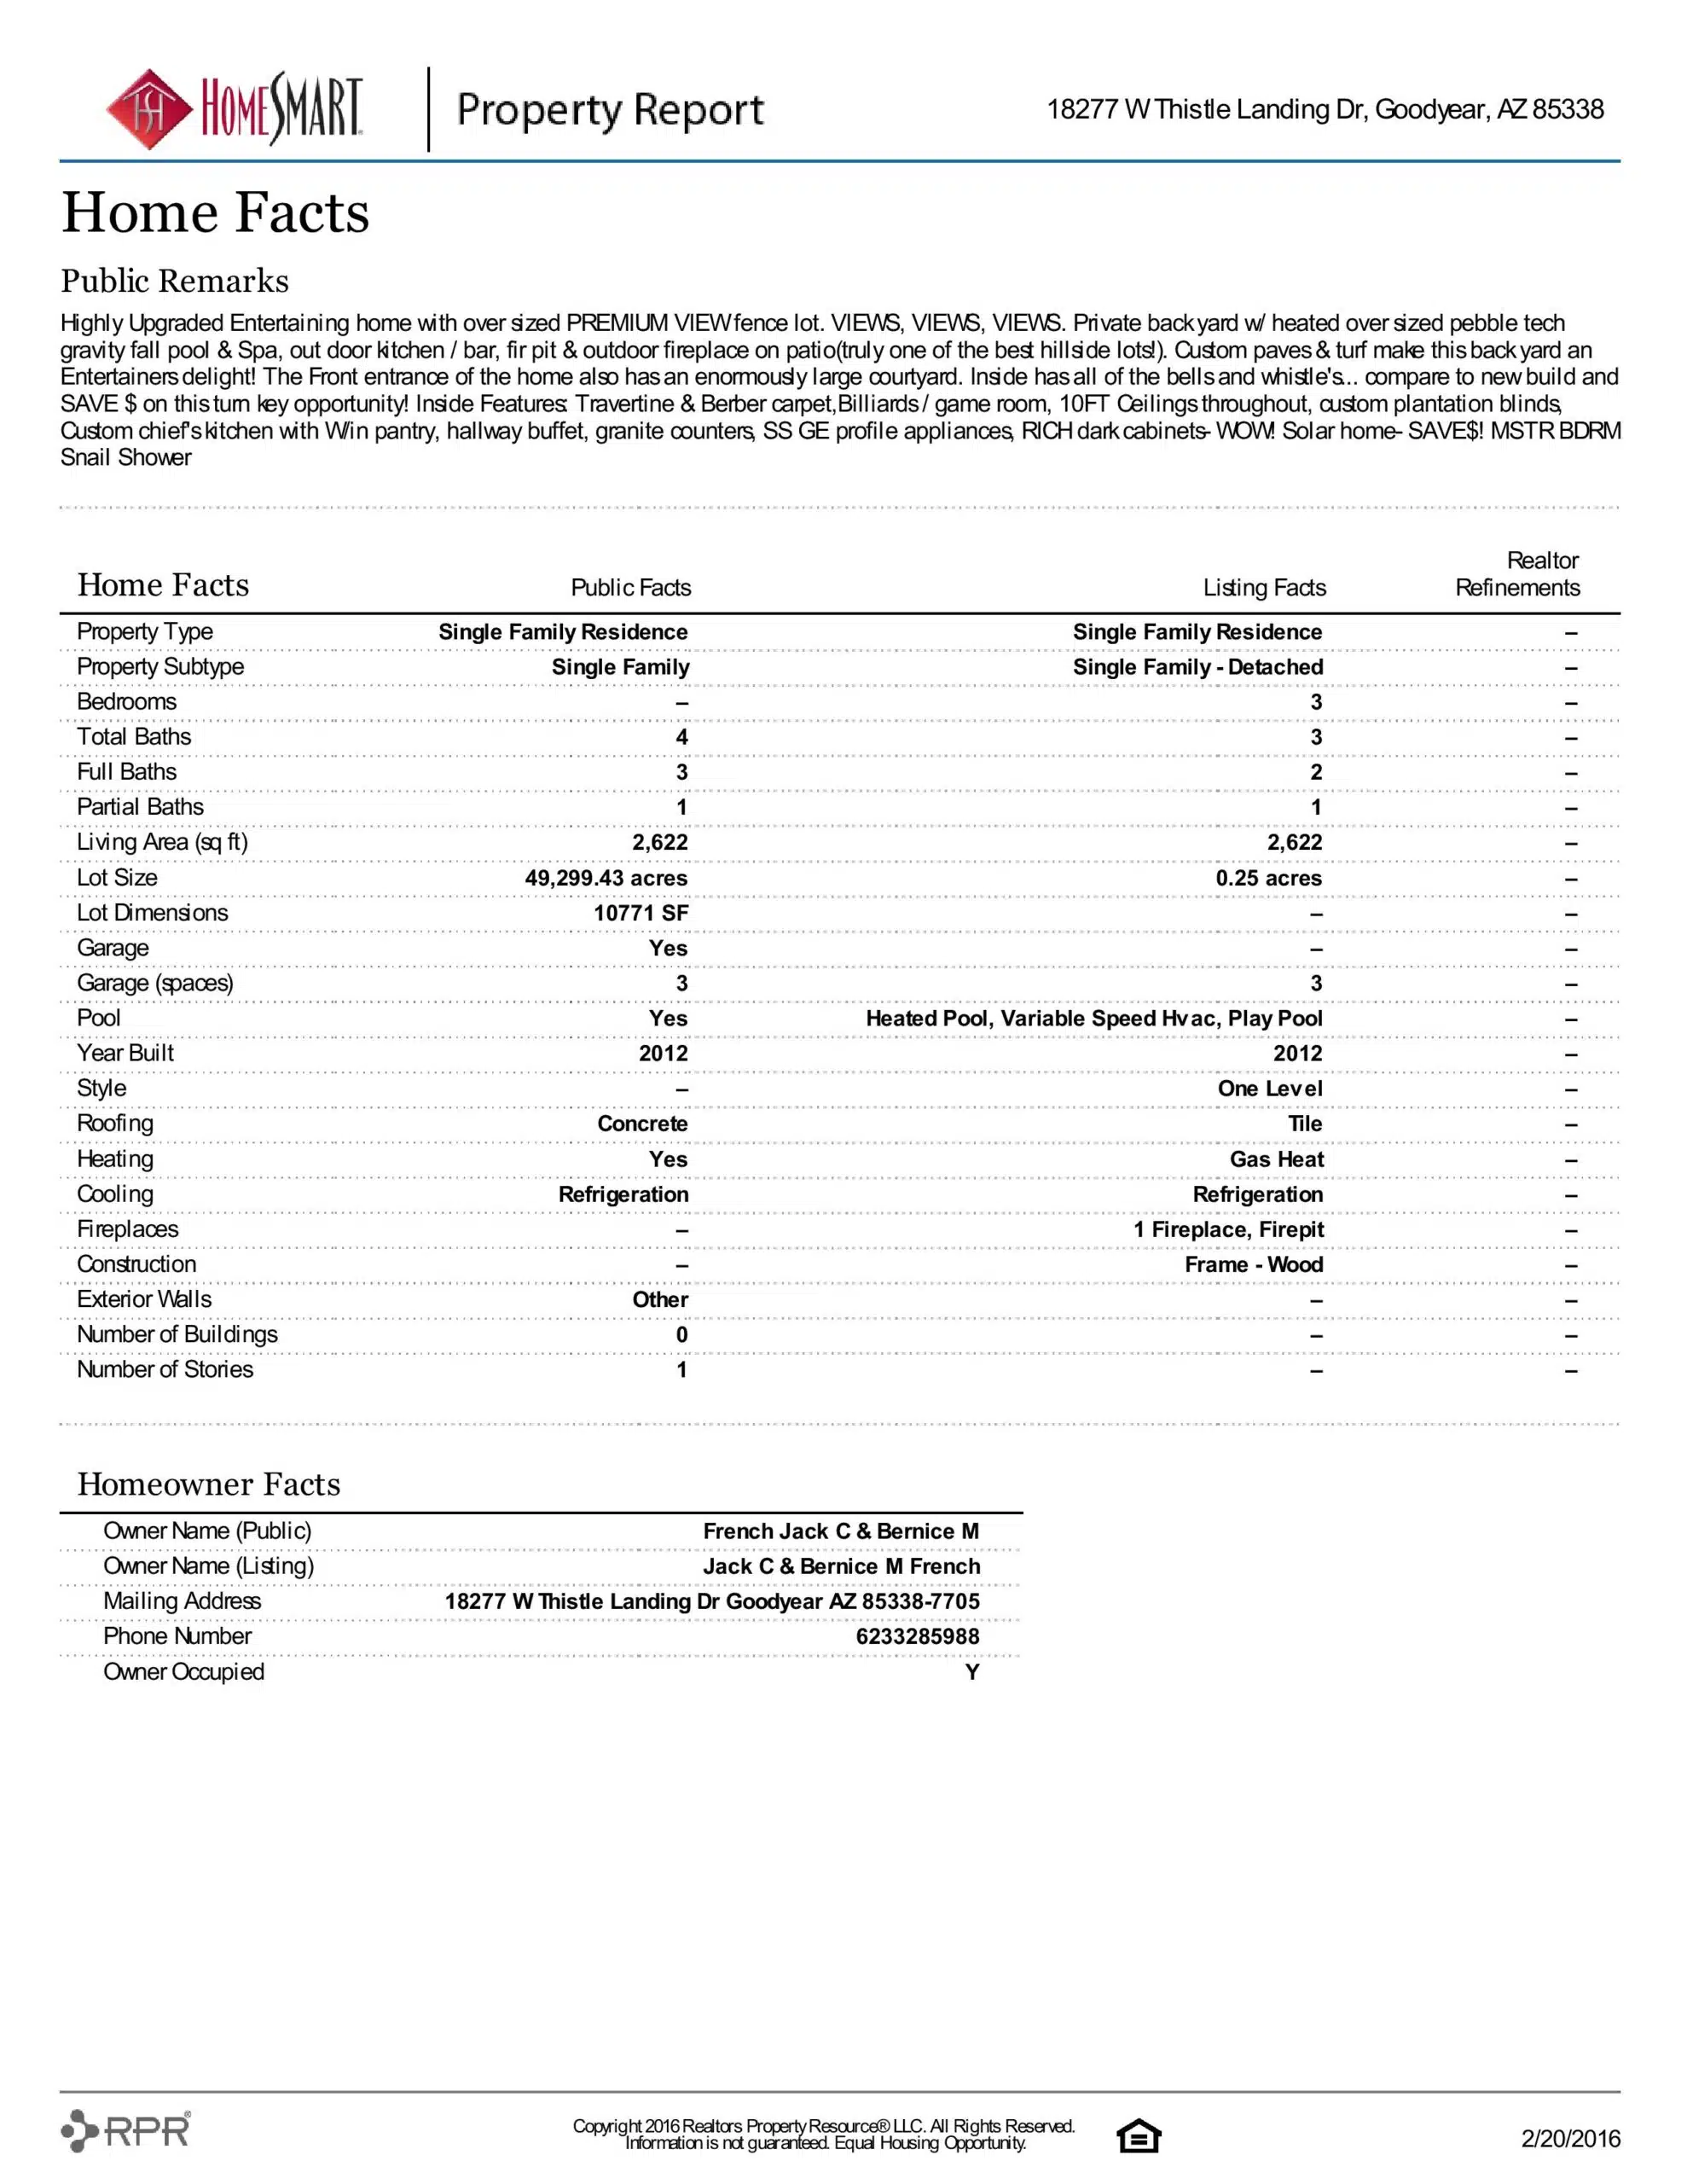 18277 W THISTLE LANDING DR PROPERTY REPORT-page-003